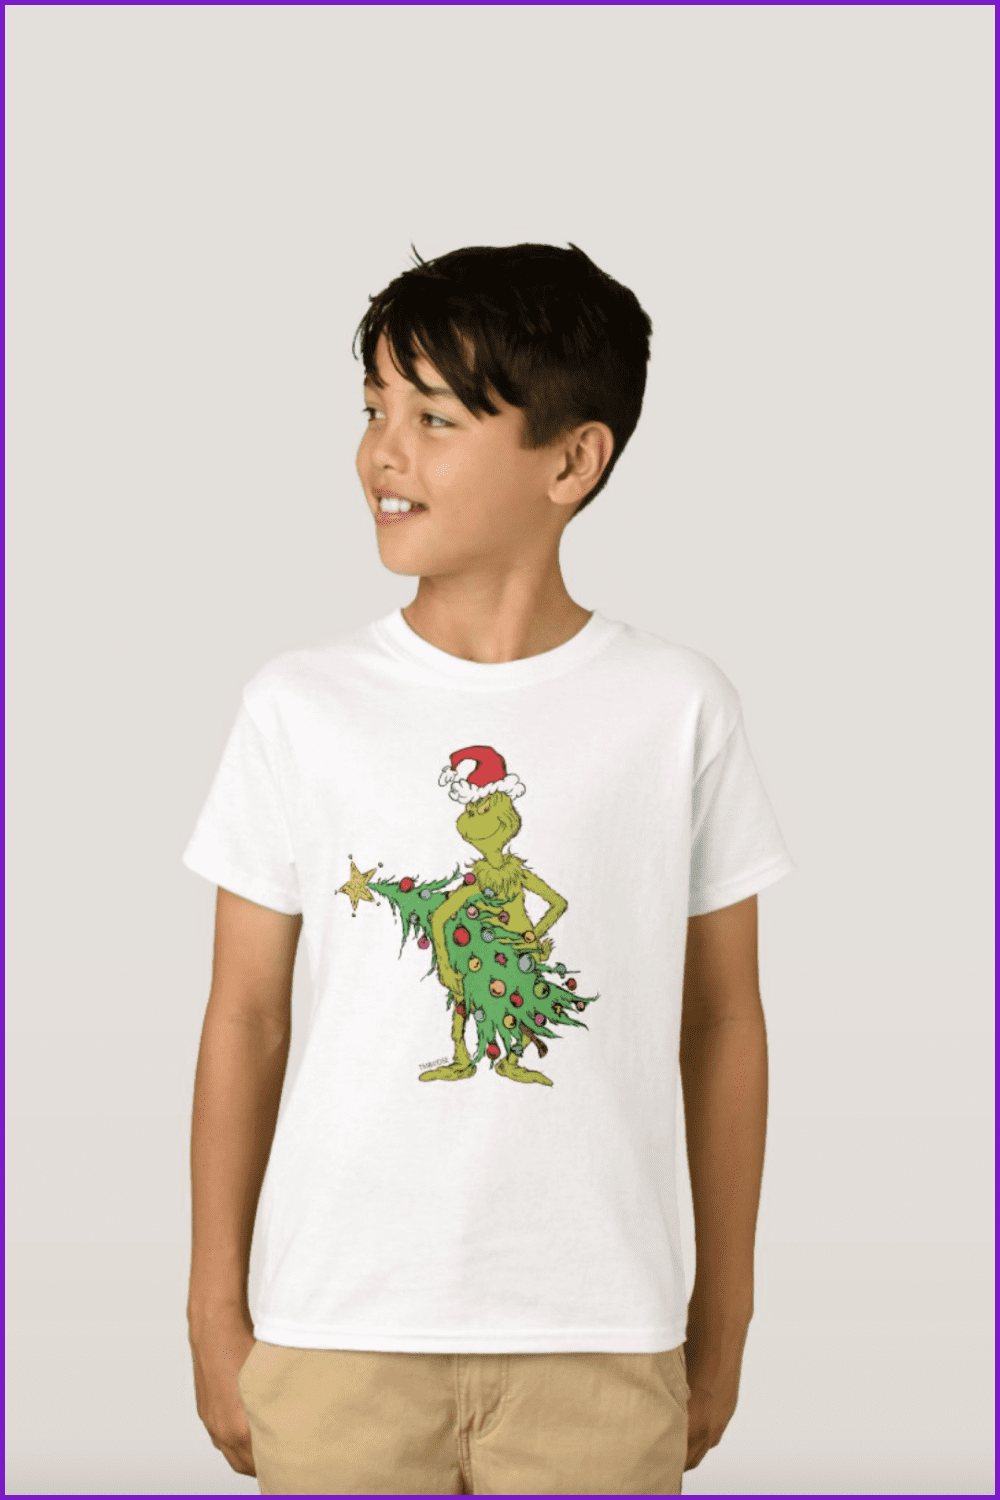 Boy in the t-shirt with the Grinch holding the Christmas tree.